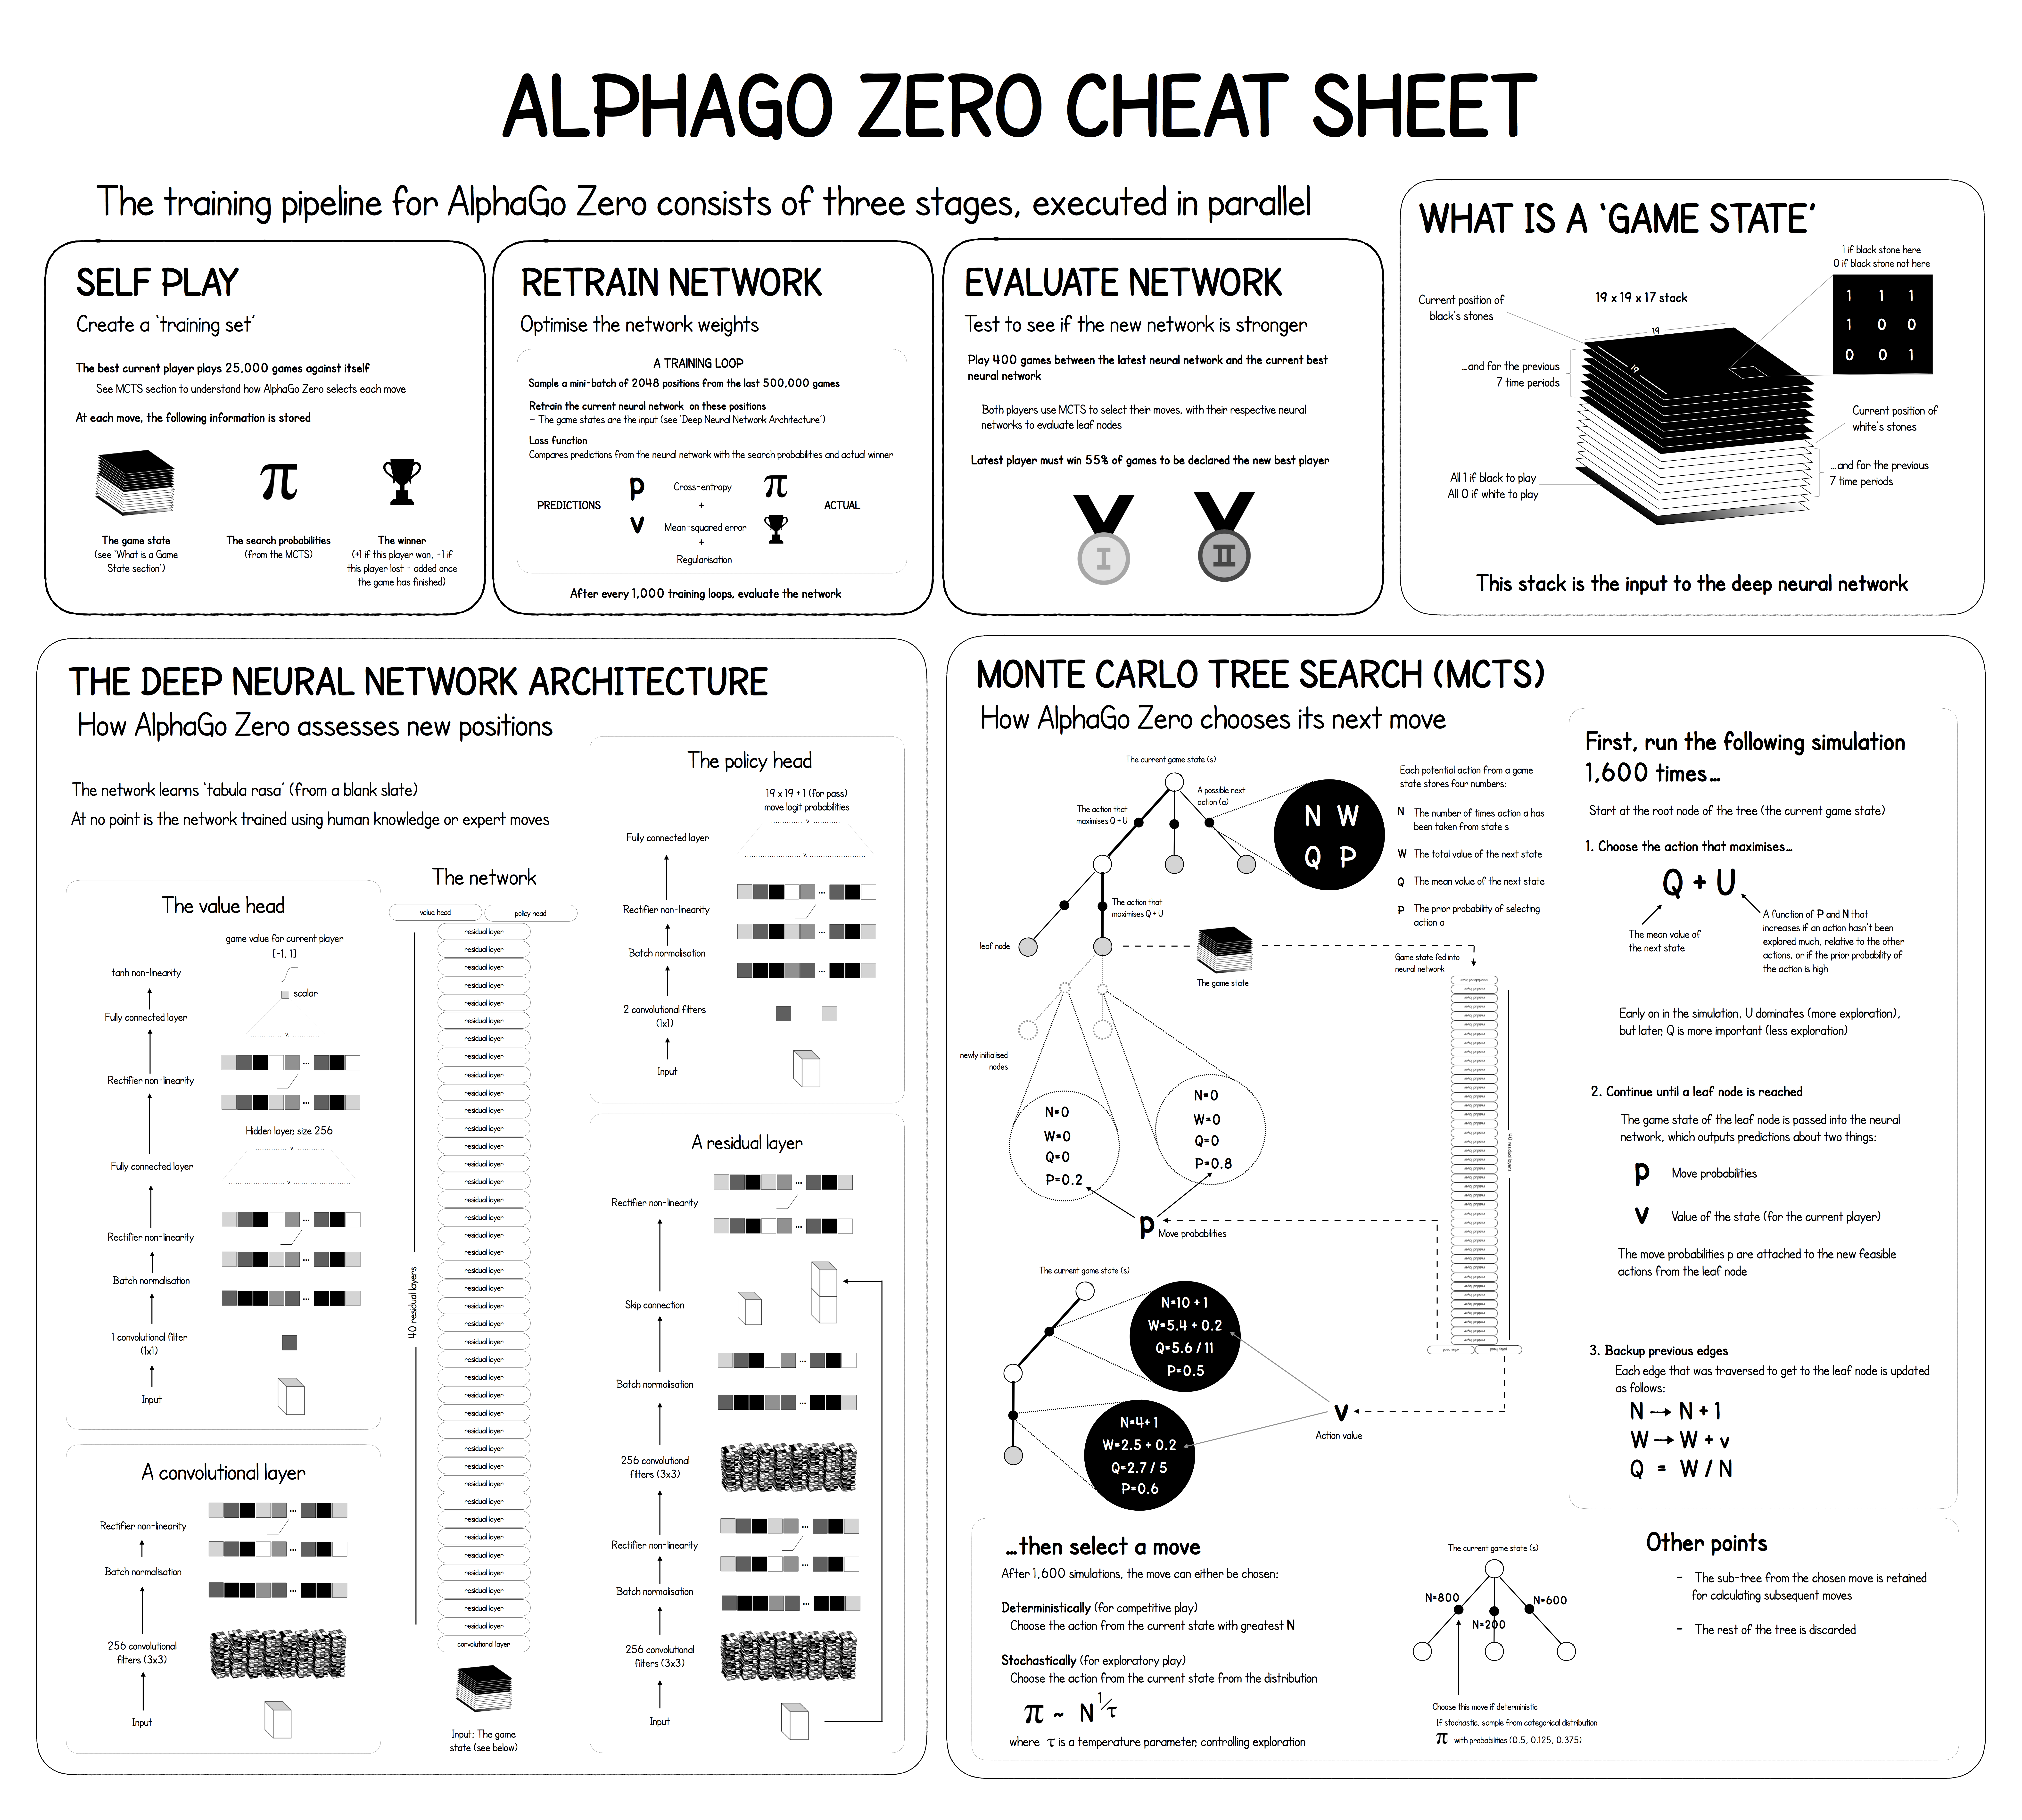 AlphaZero: A General Reinforcement Learning Algorithm that Masters Chess,  Shogi and Go through Self-Play